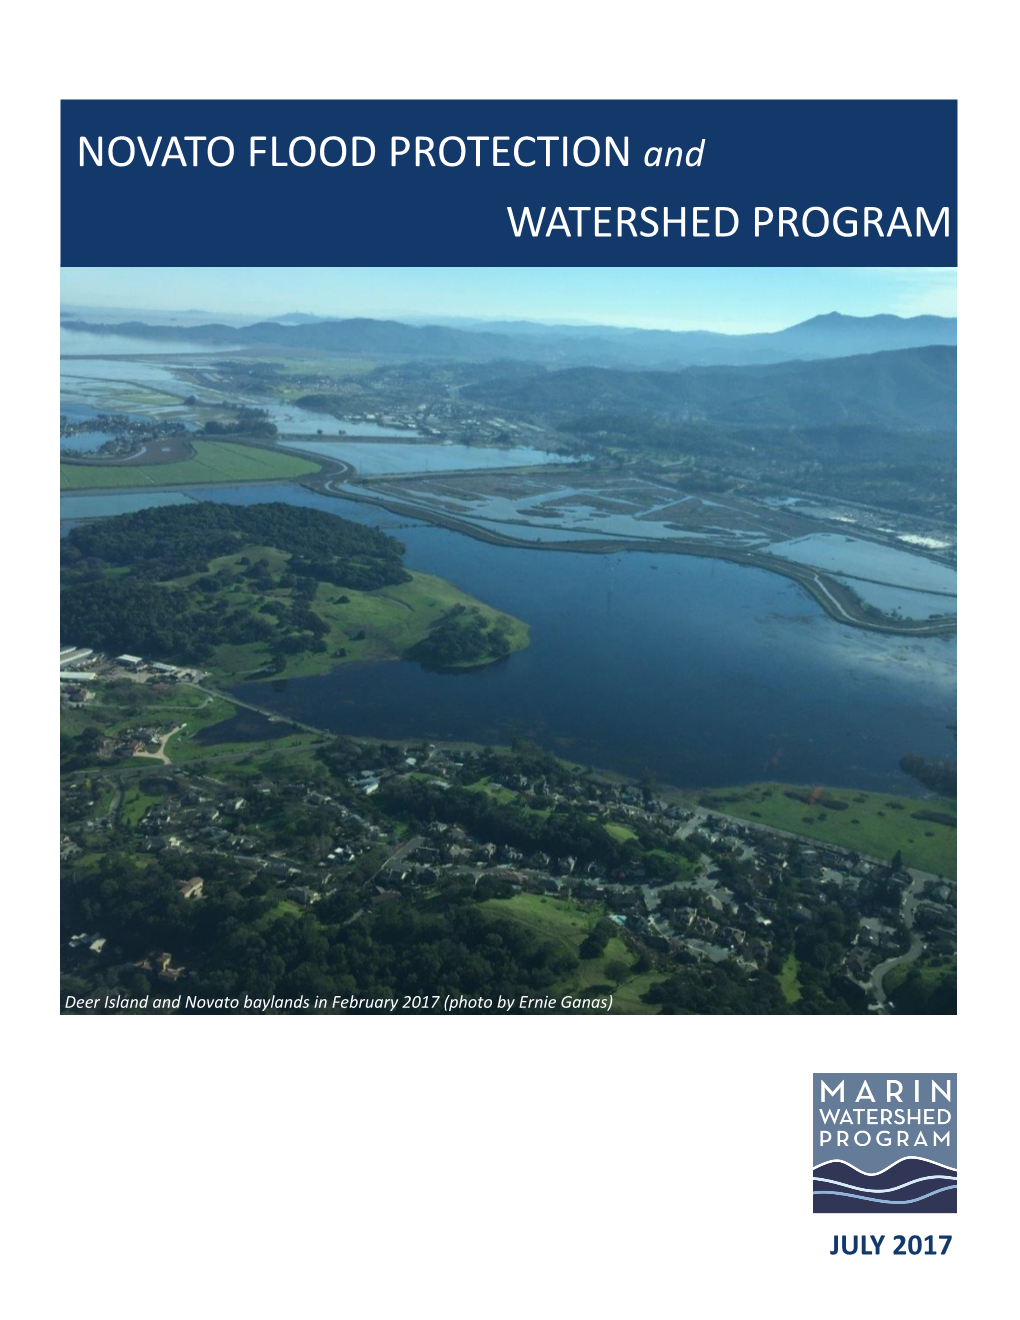 NOVATO FLOOD PROTECTION and WATERSHED PROGRAM